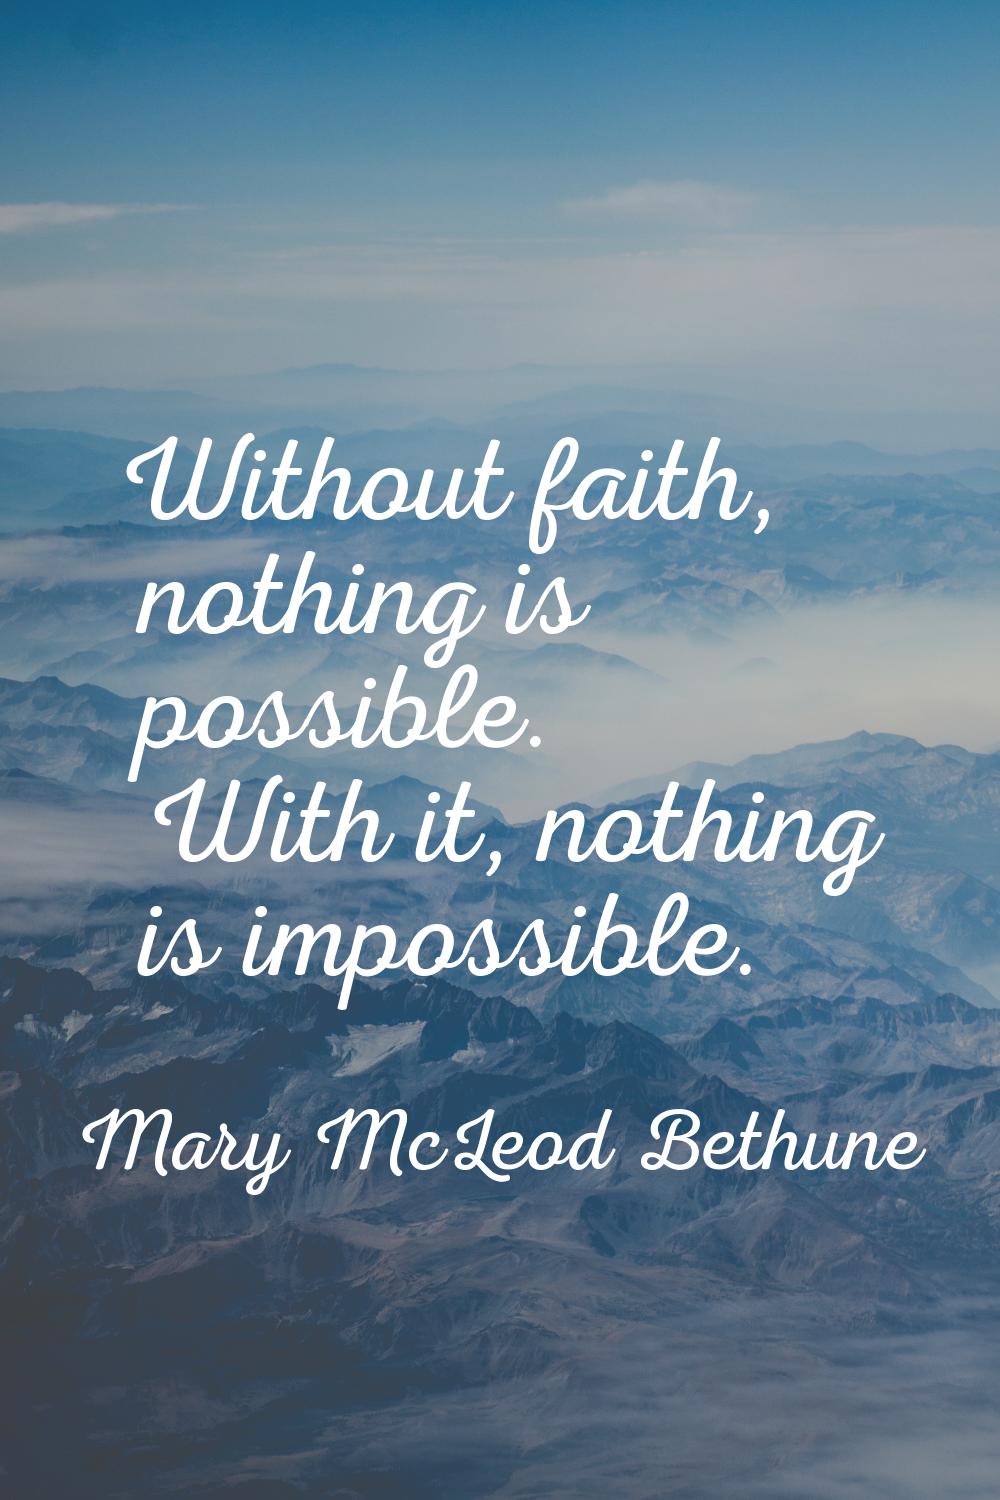 Without faith, nothing is possible. With it, nothing is impossible.